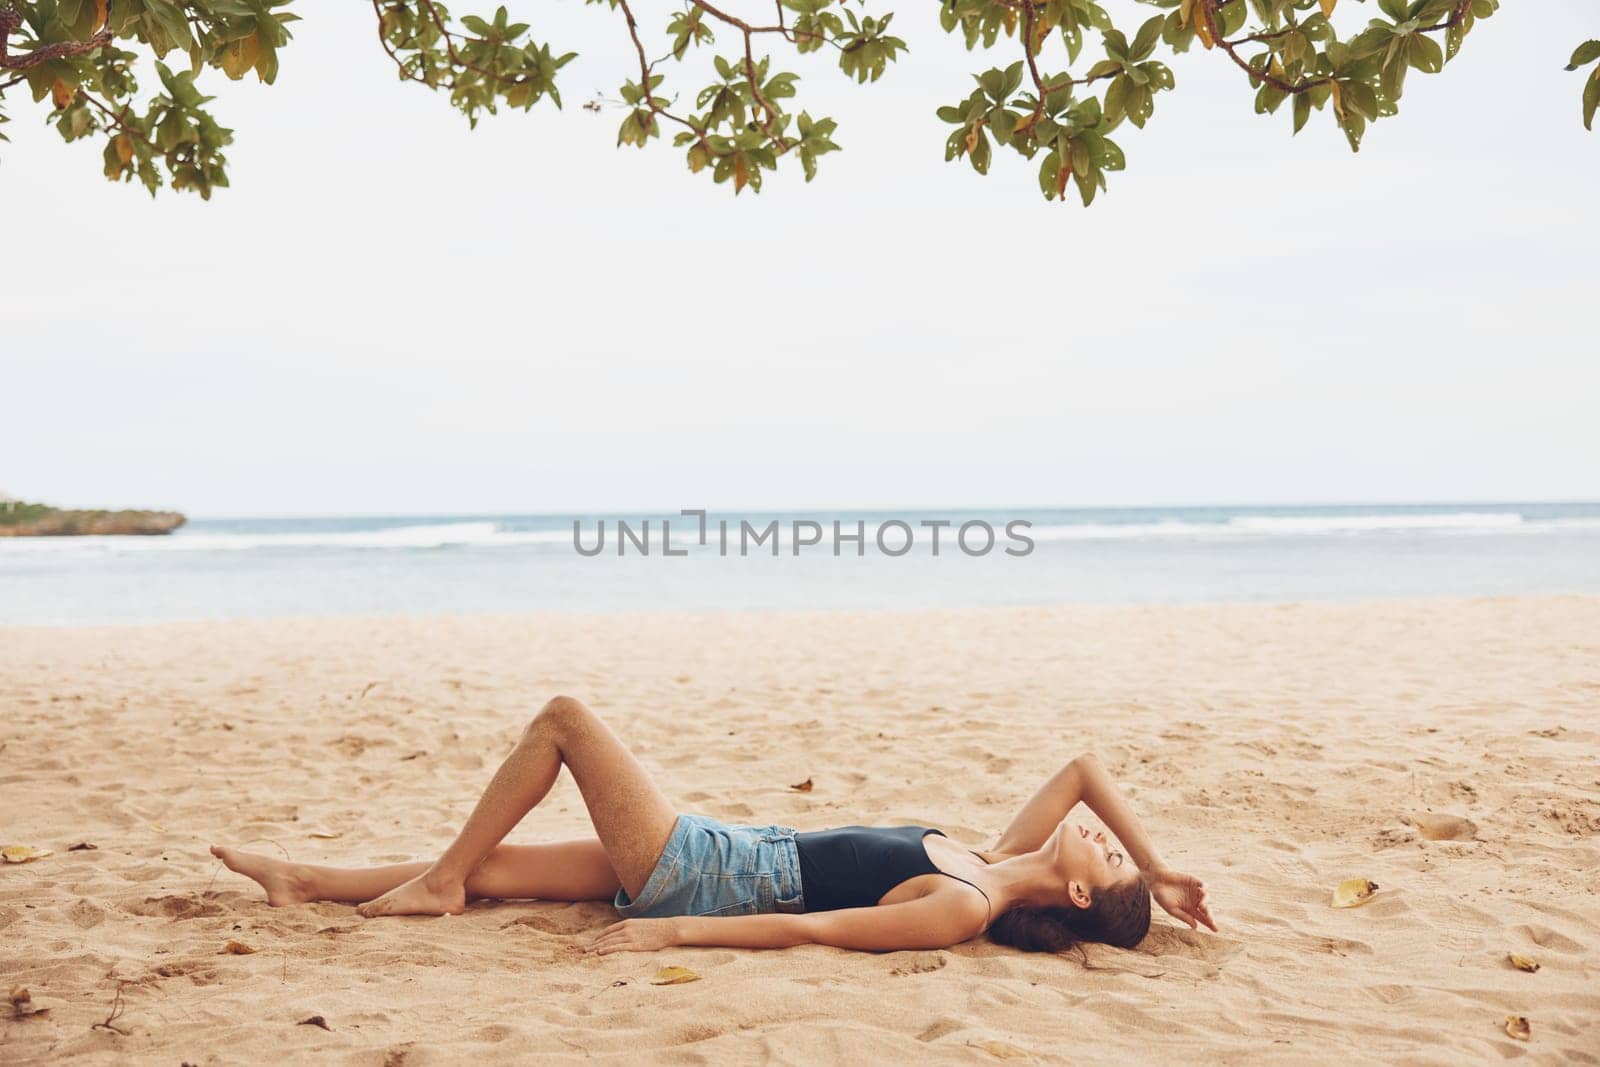 hair woman travel beautiful sea sitting sexy smile fashion lifestyle freedom relax outdoor holiday nature sand water natural beach vacation person